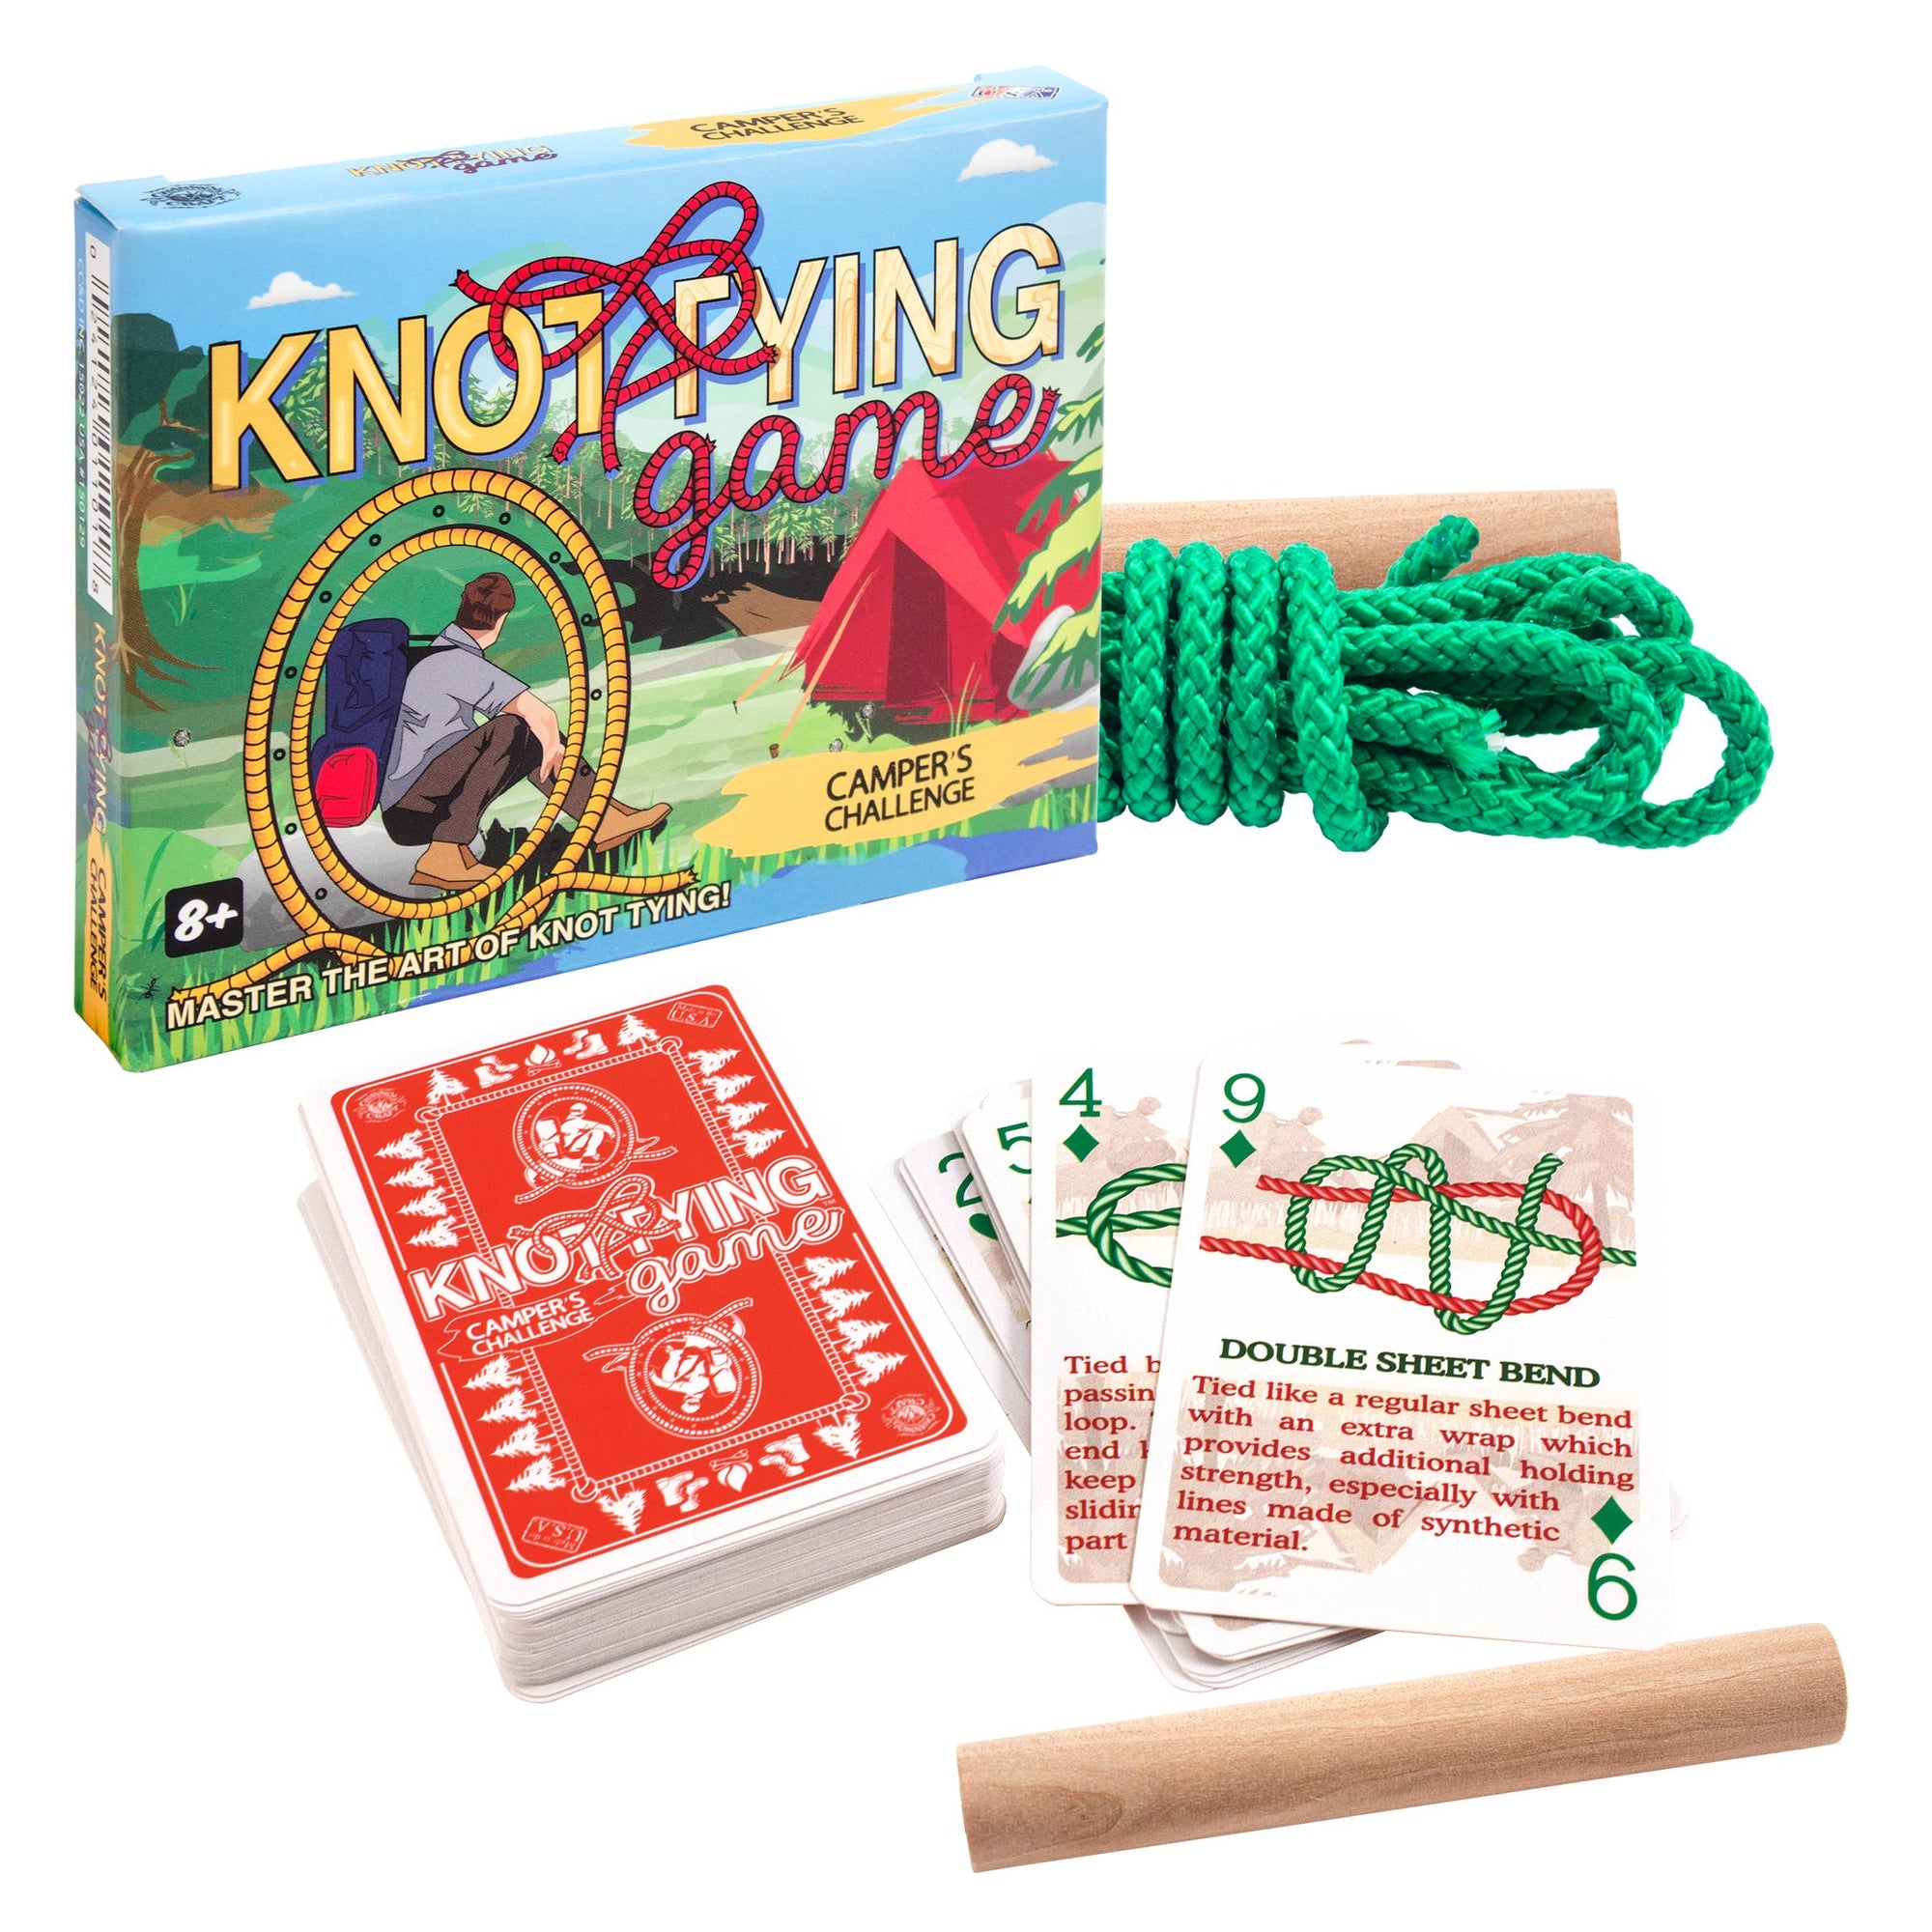 Knot Tying Kit - Camper's Edition featuring cards, a green rope, and a wooden dowel on a white background, ideal for camping.